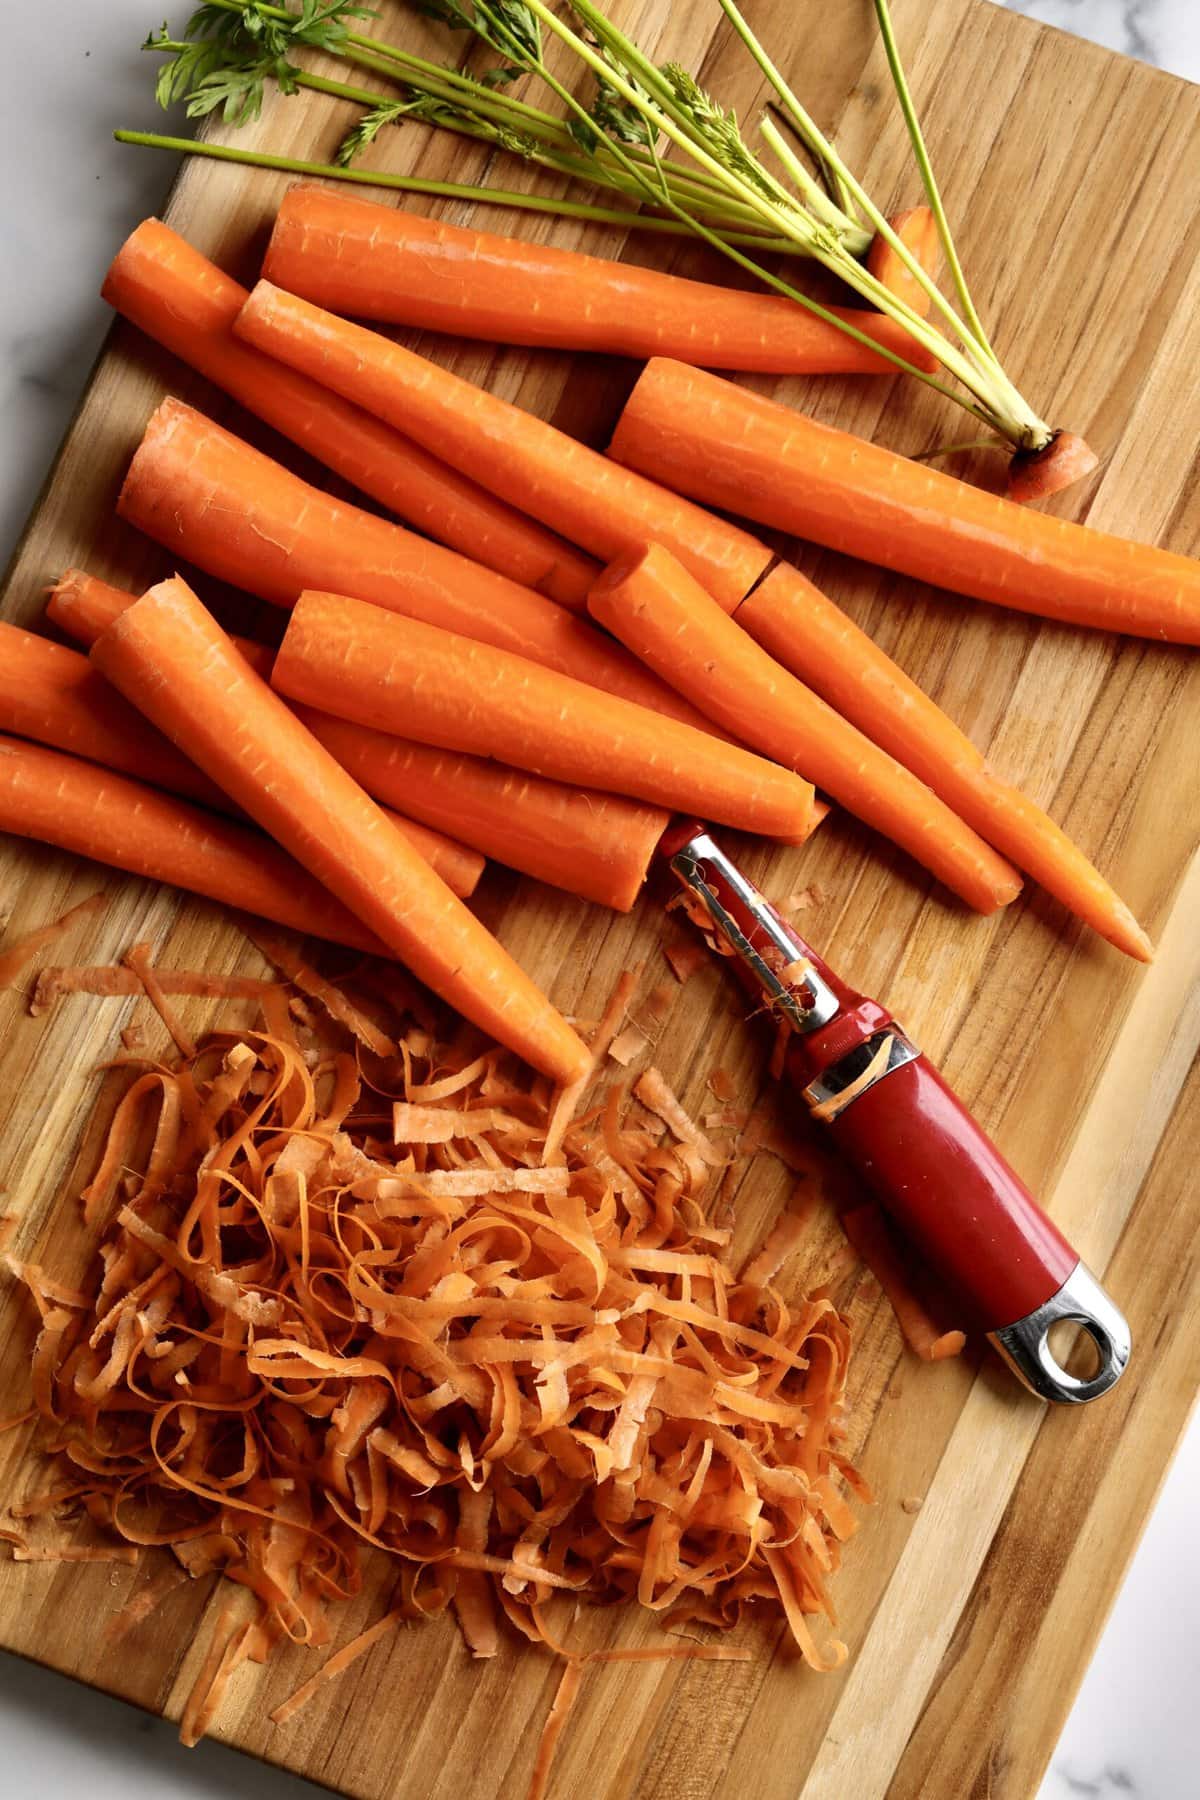 peeled carrots on a cutting board with peeler.